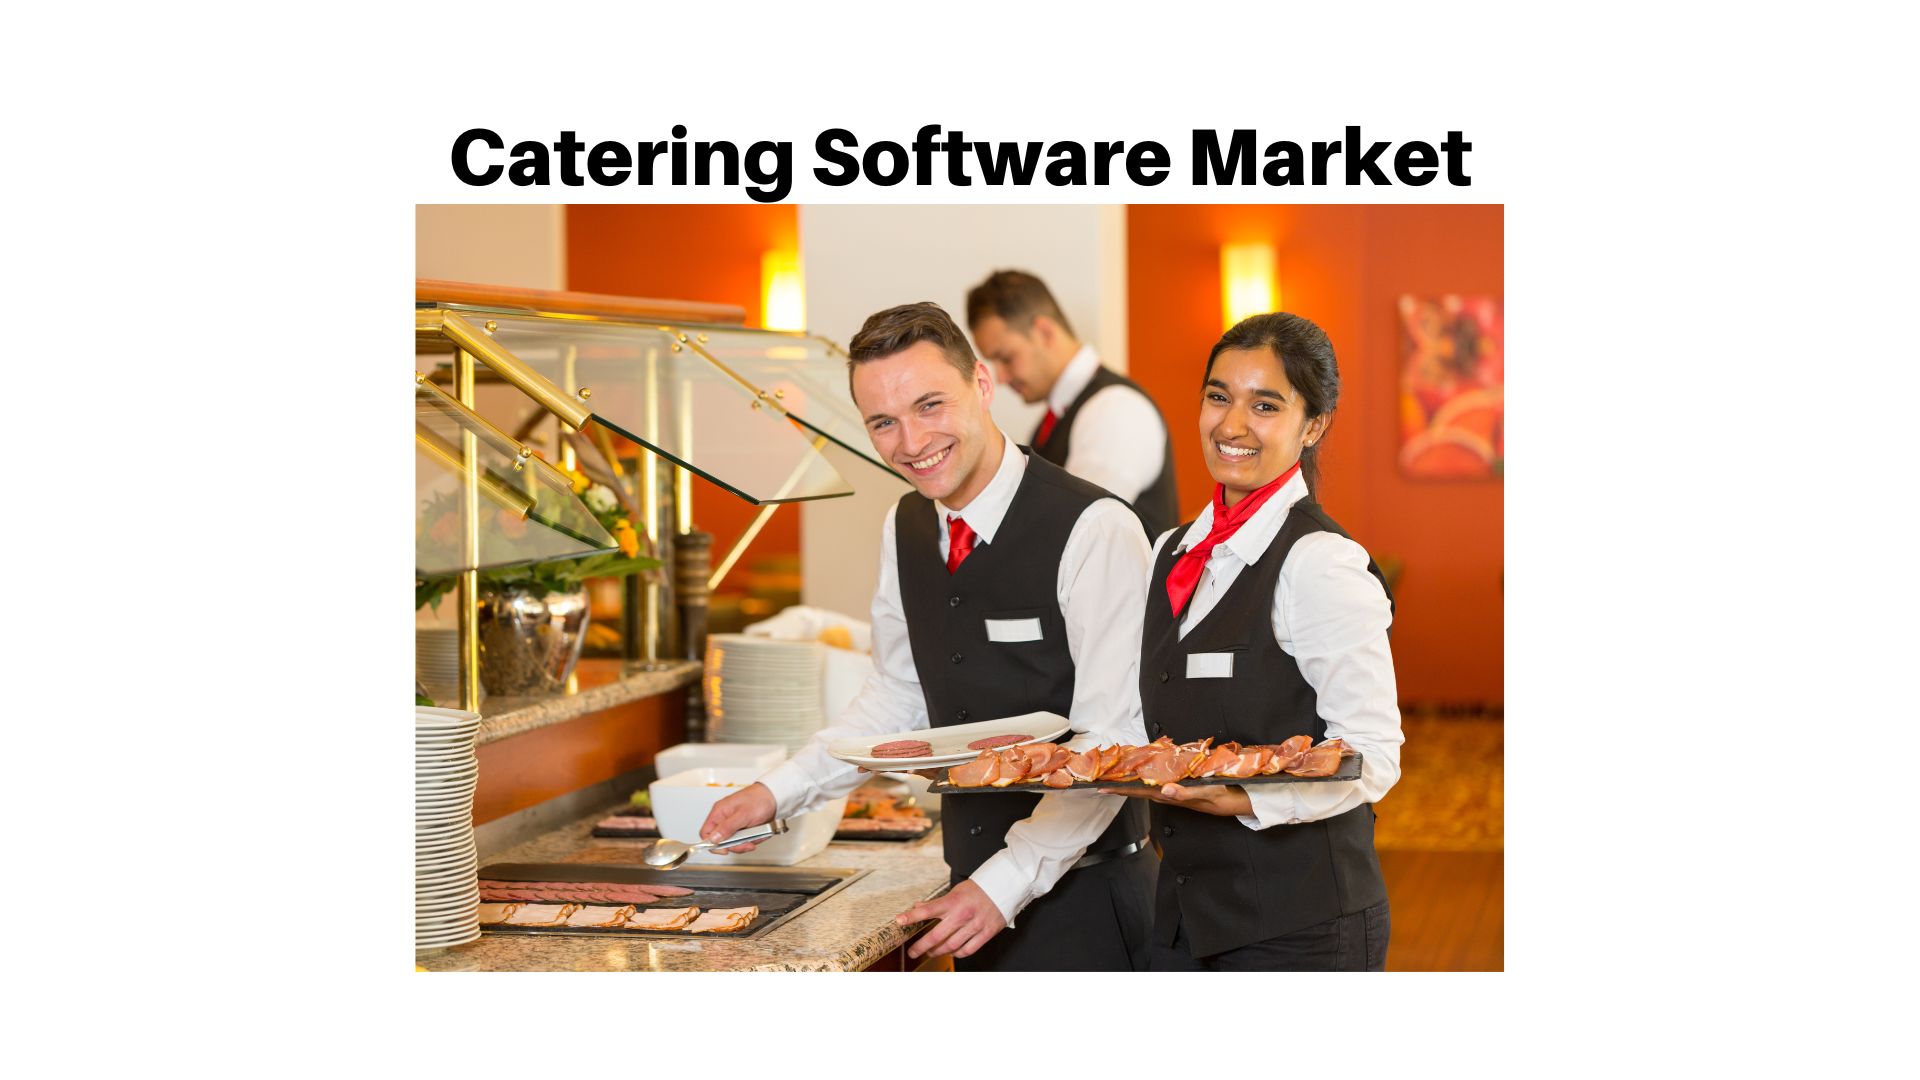 Catering Software Market Set to Grow at a CAGR of 14.4% from 2023 to 2033